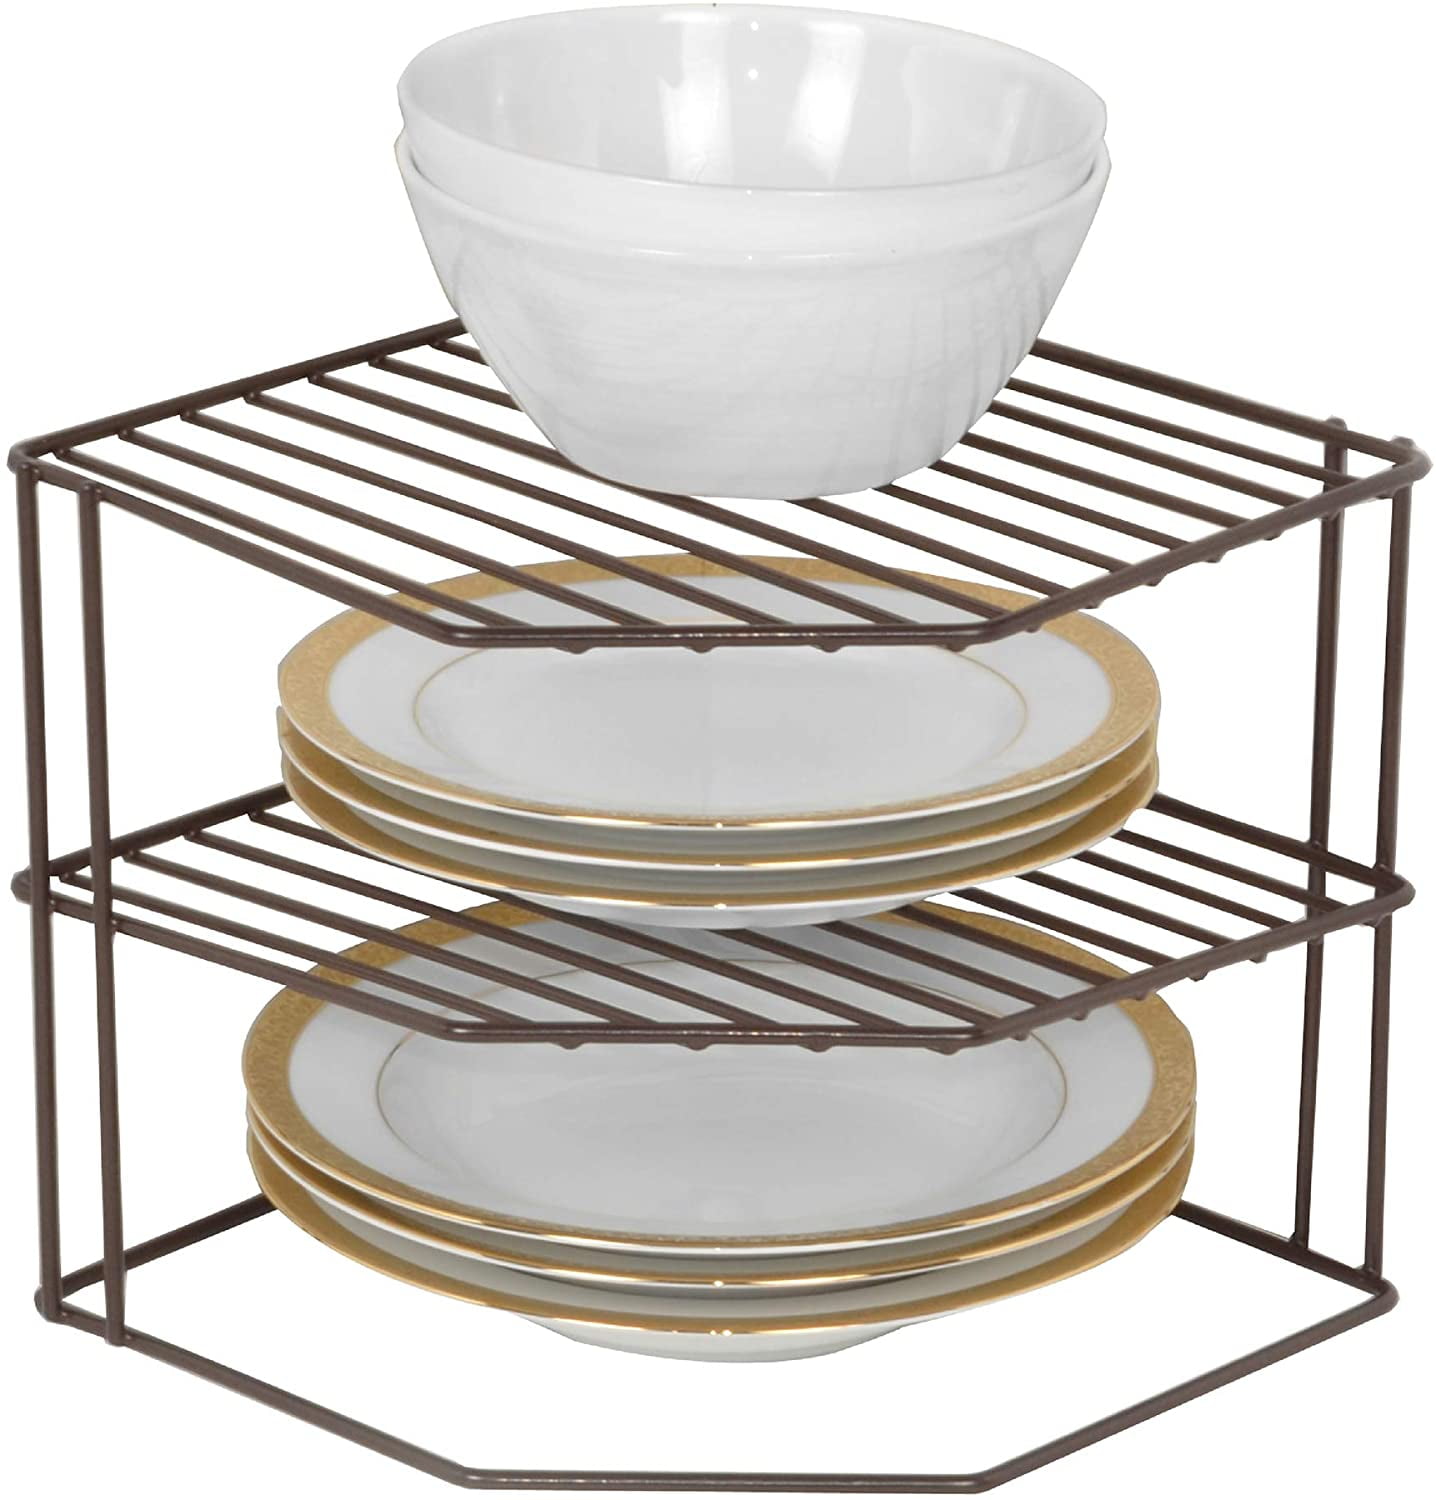 Smallbone of Devizes classic 3 tier plate rack with cornice top  Country  kitchen designs, Plate racks in kitchen, Diy kitchen storage